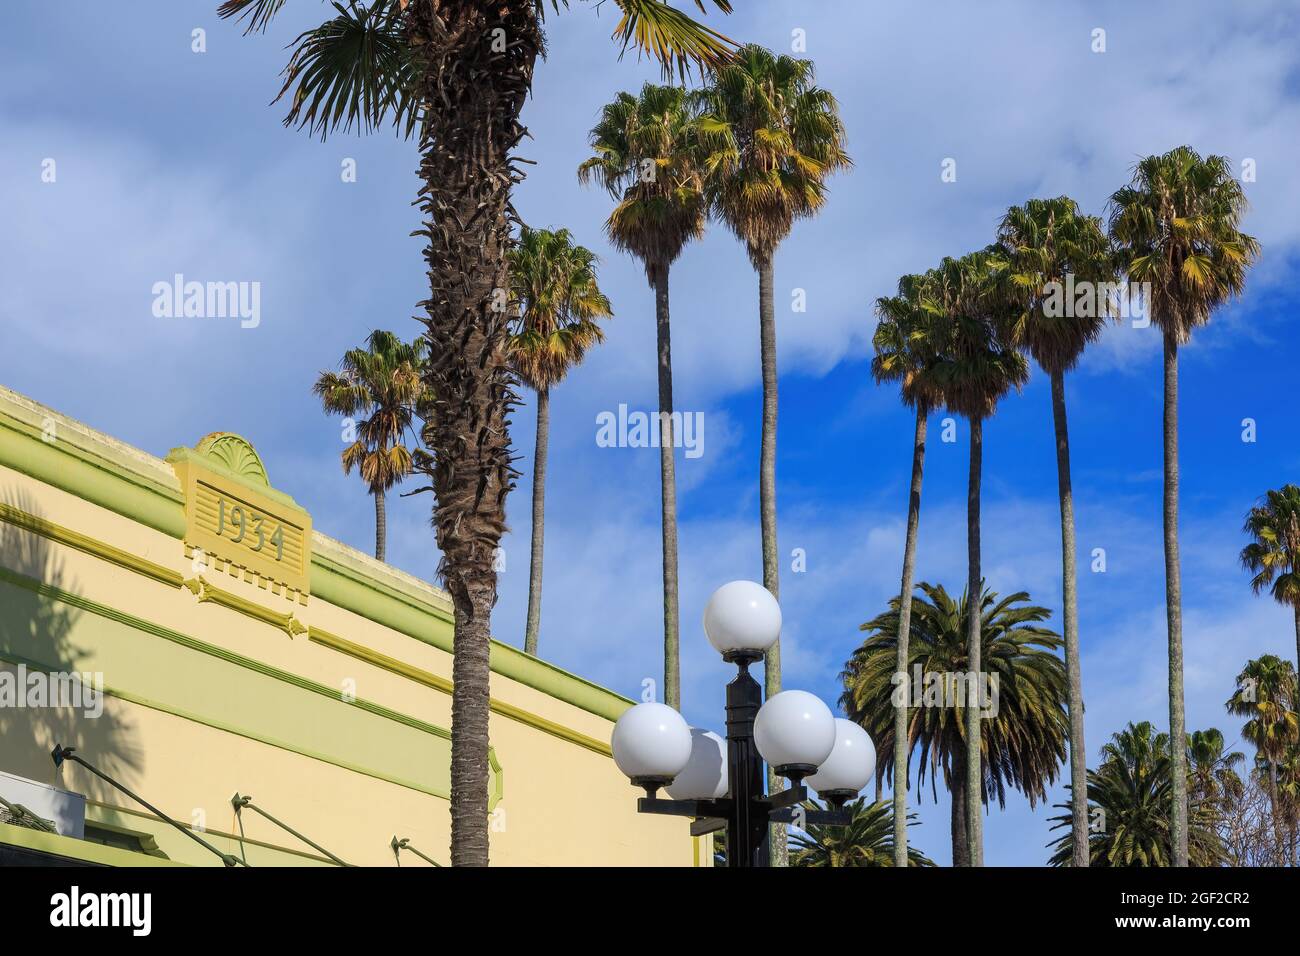 Napier, New Zealand. One of the town's Art Deco buildings inscribed '1934' and the palm trees of Clive Square Stock Photo